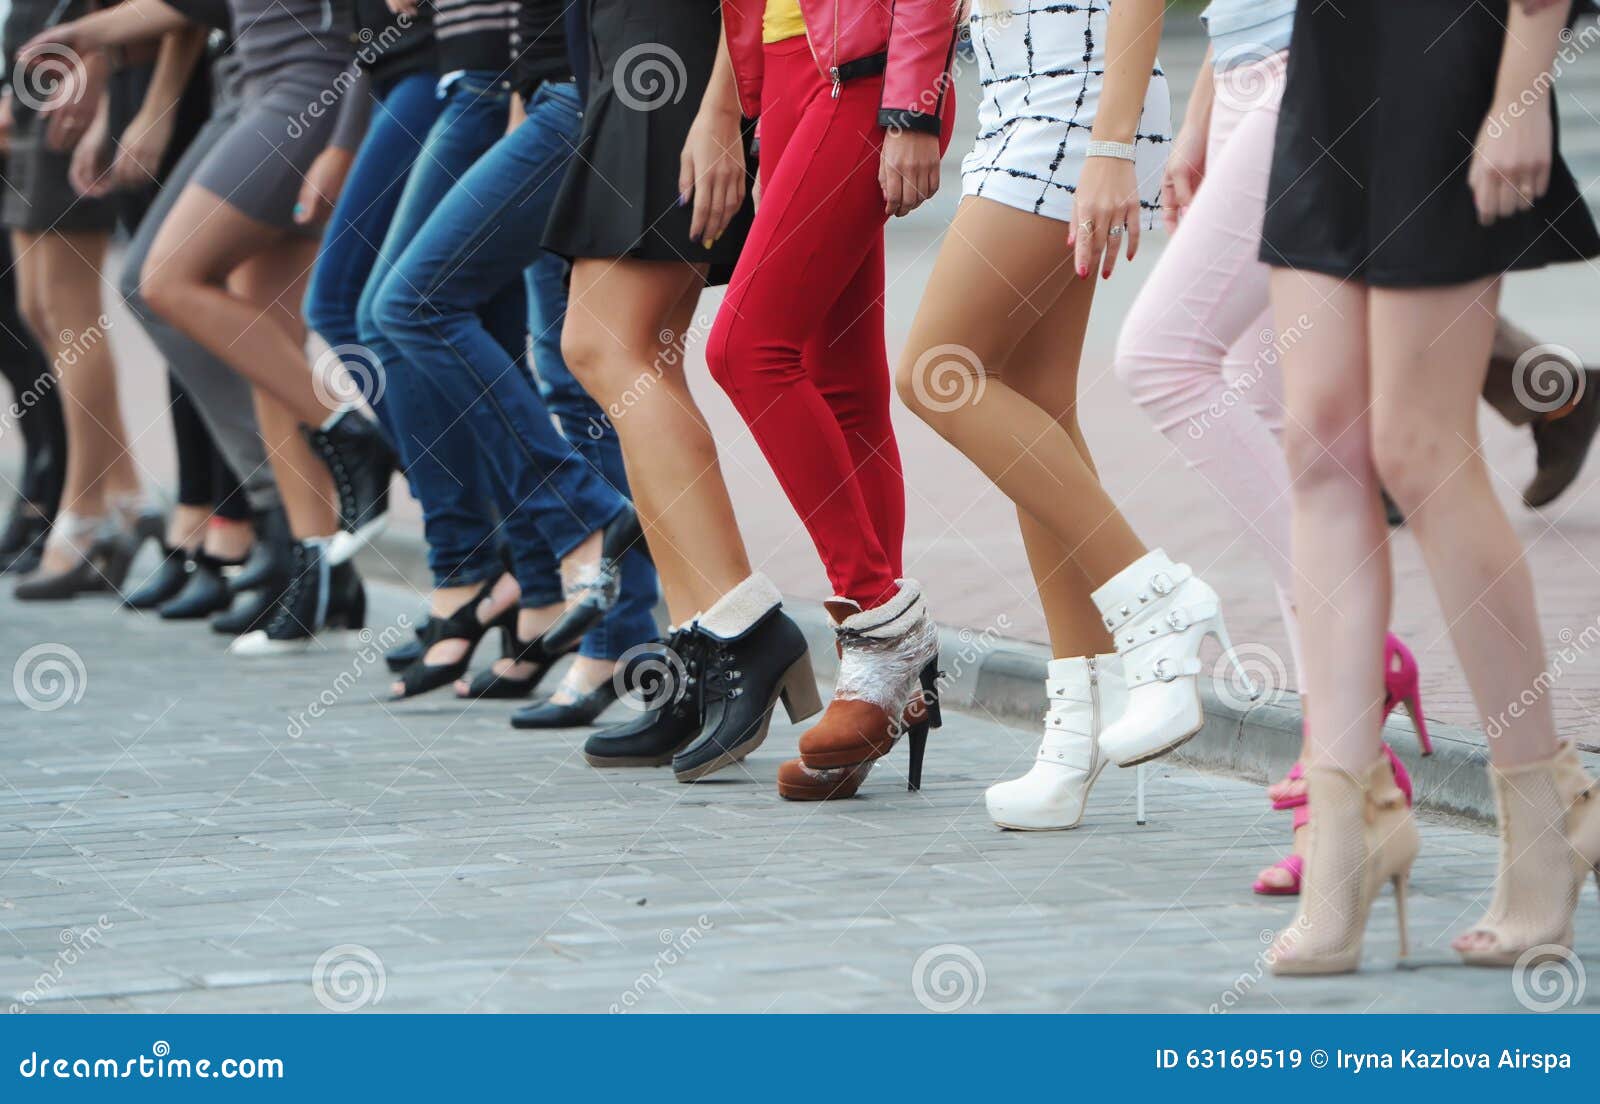 Competition among Young Girls Run in Heels Stock Image - Image of foot ...